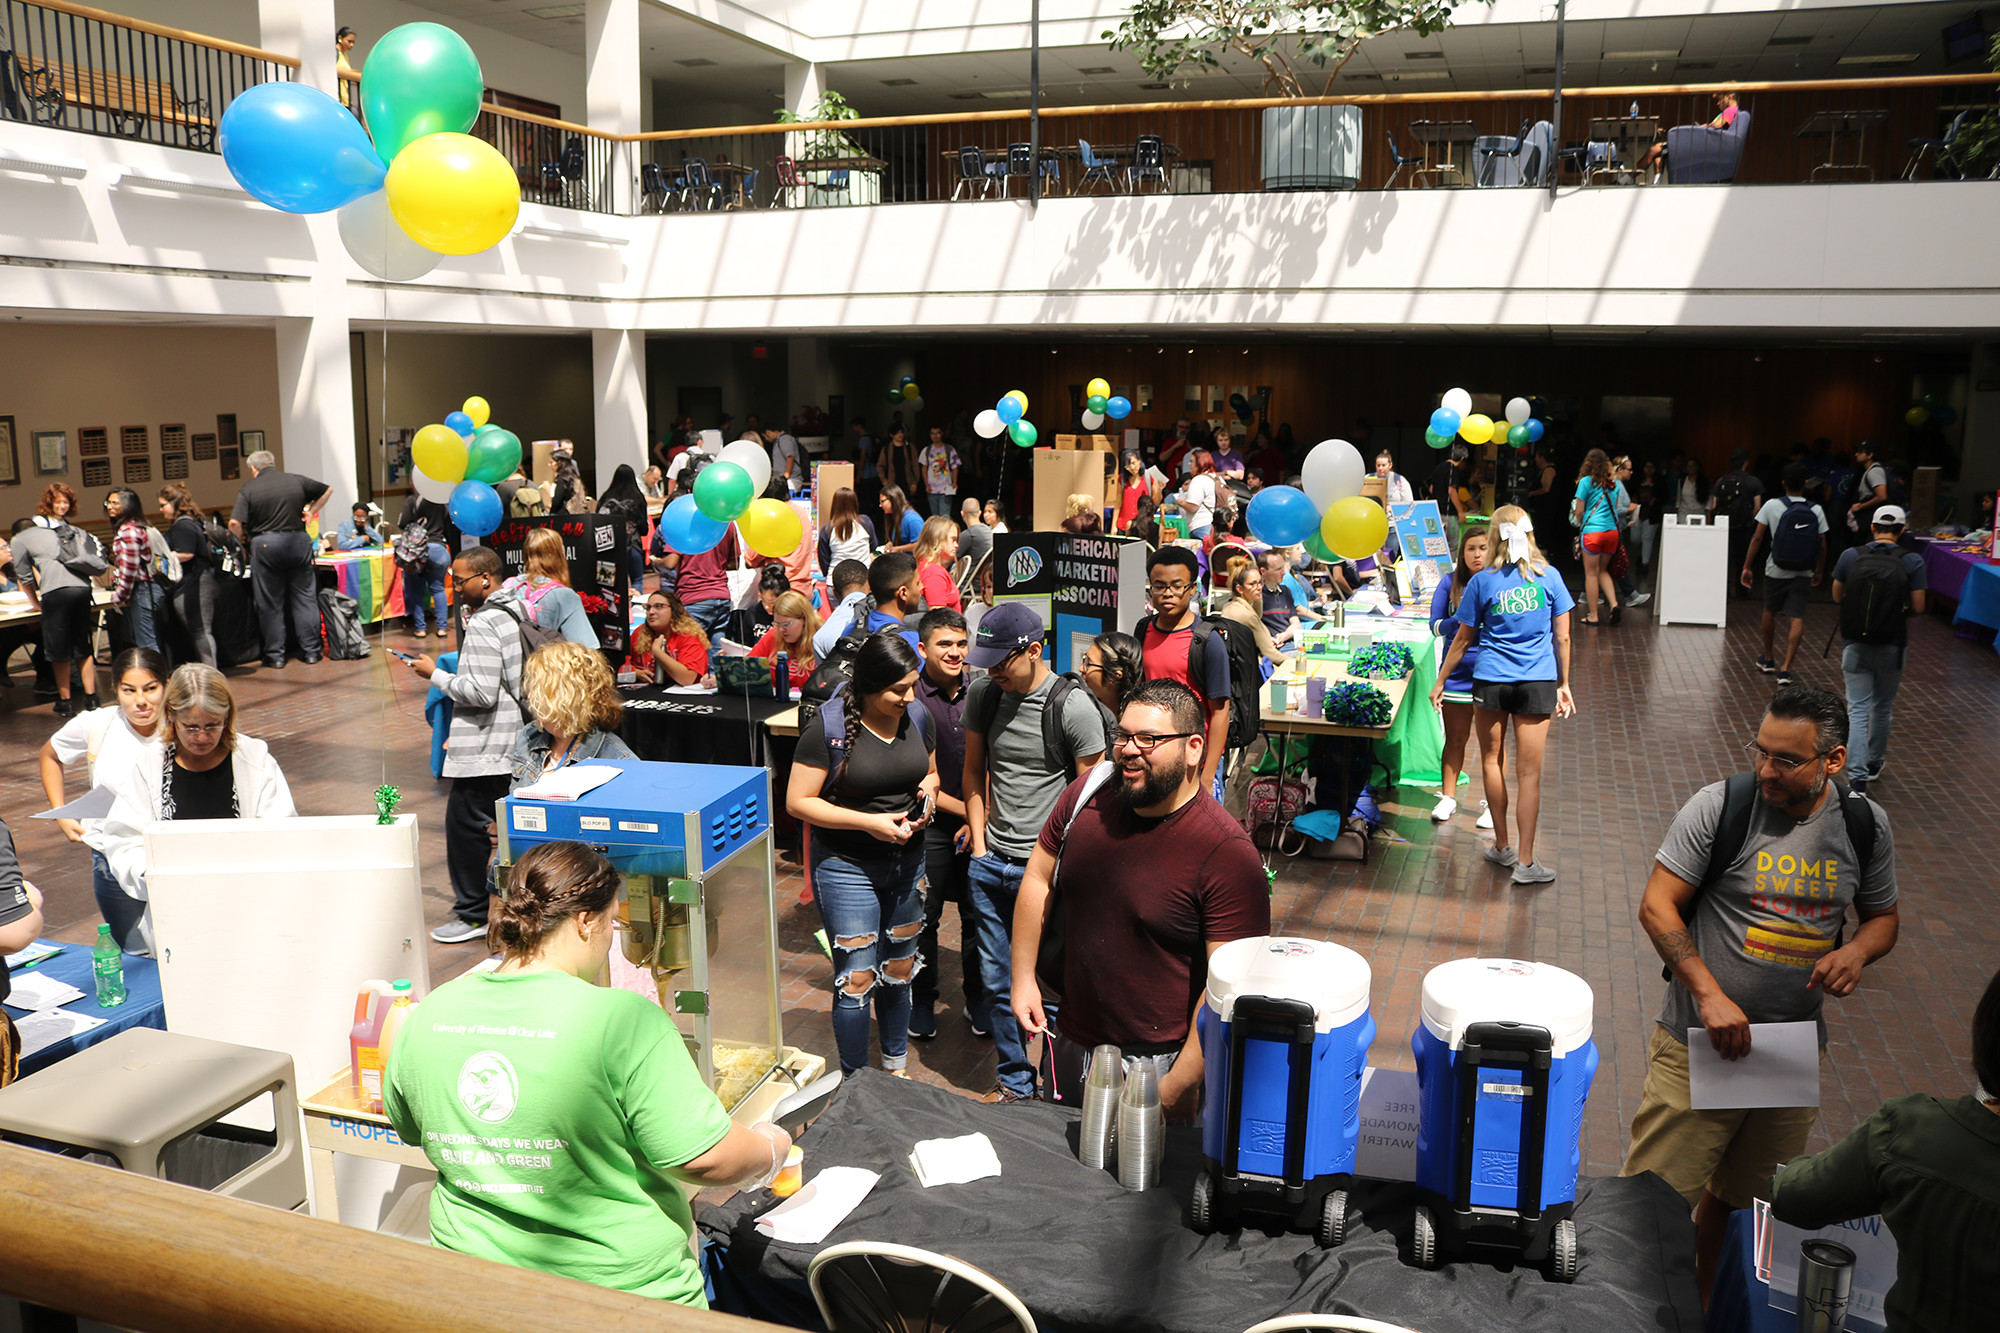 Students enjoy the Student Orgs Expo by getting popcorn. Blue, green, and yellow balloons are also in the scene.